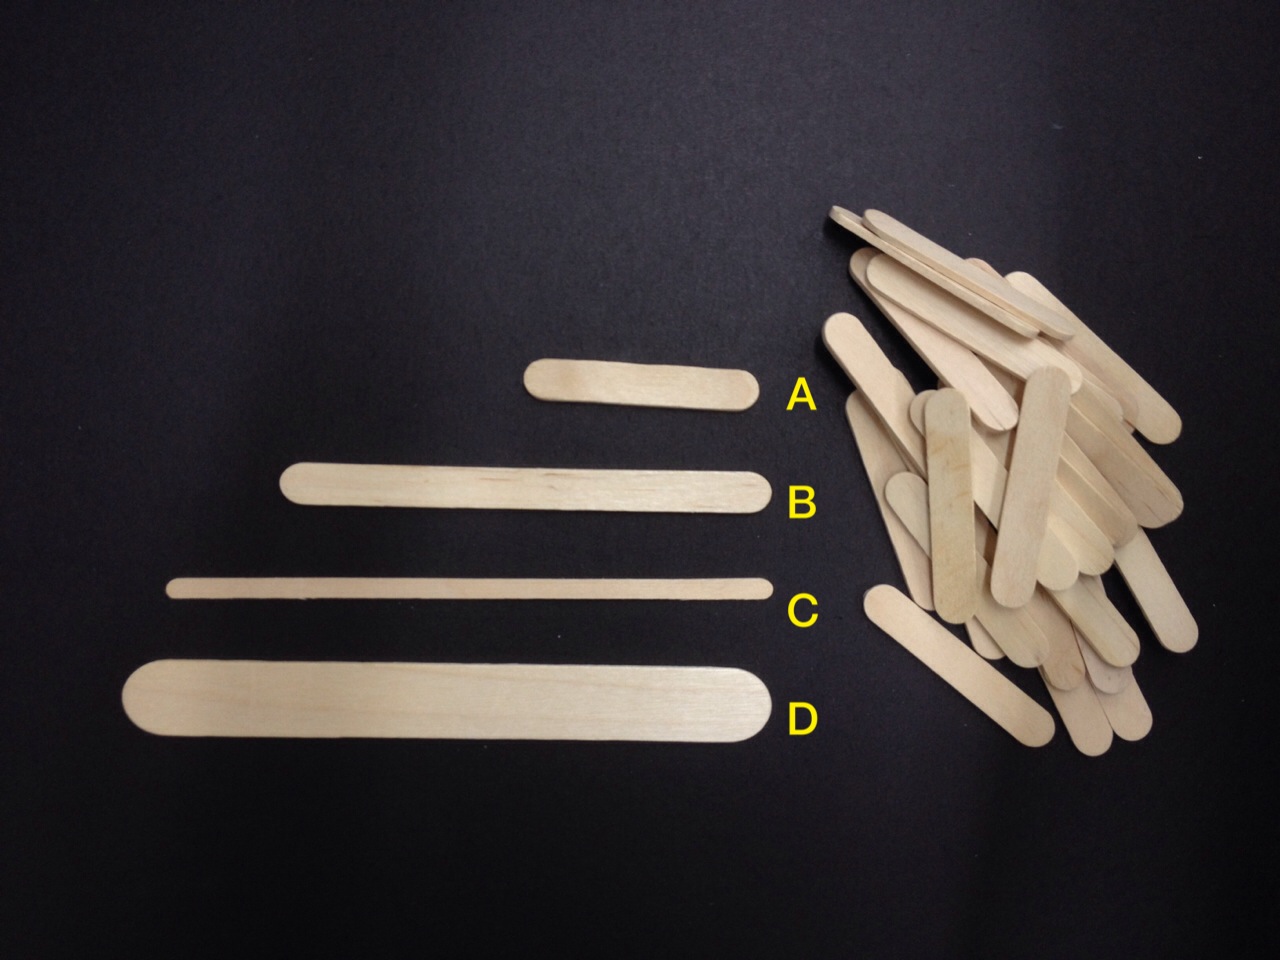 popsicle stick 1 pack [thin5X140mm] ( 約9X支 ) sale in CSW shop only